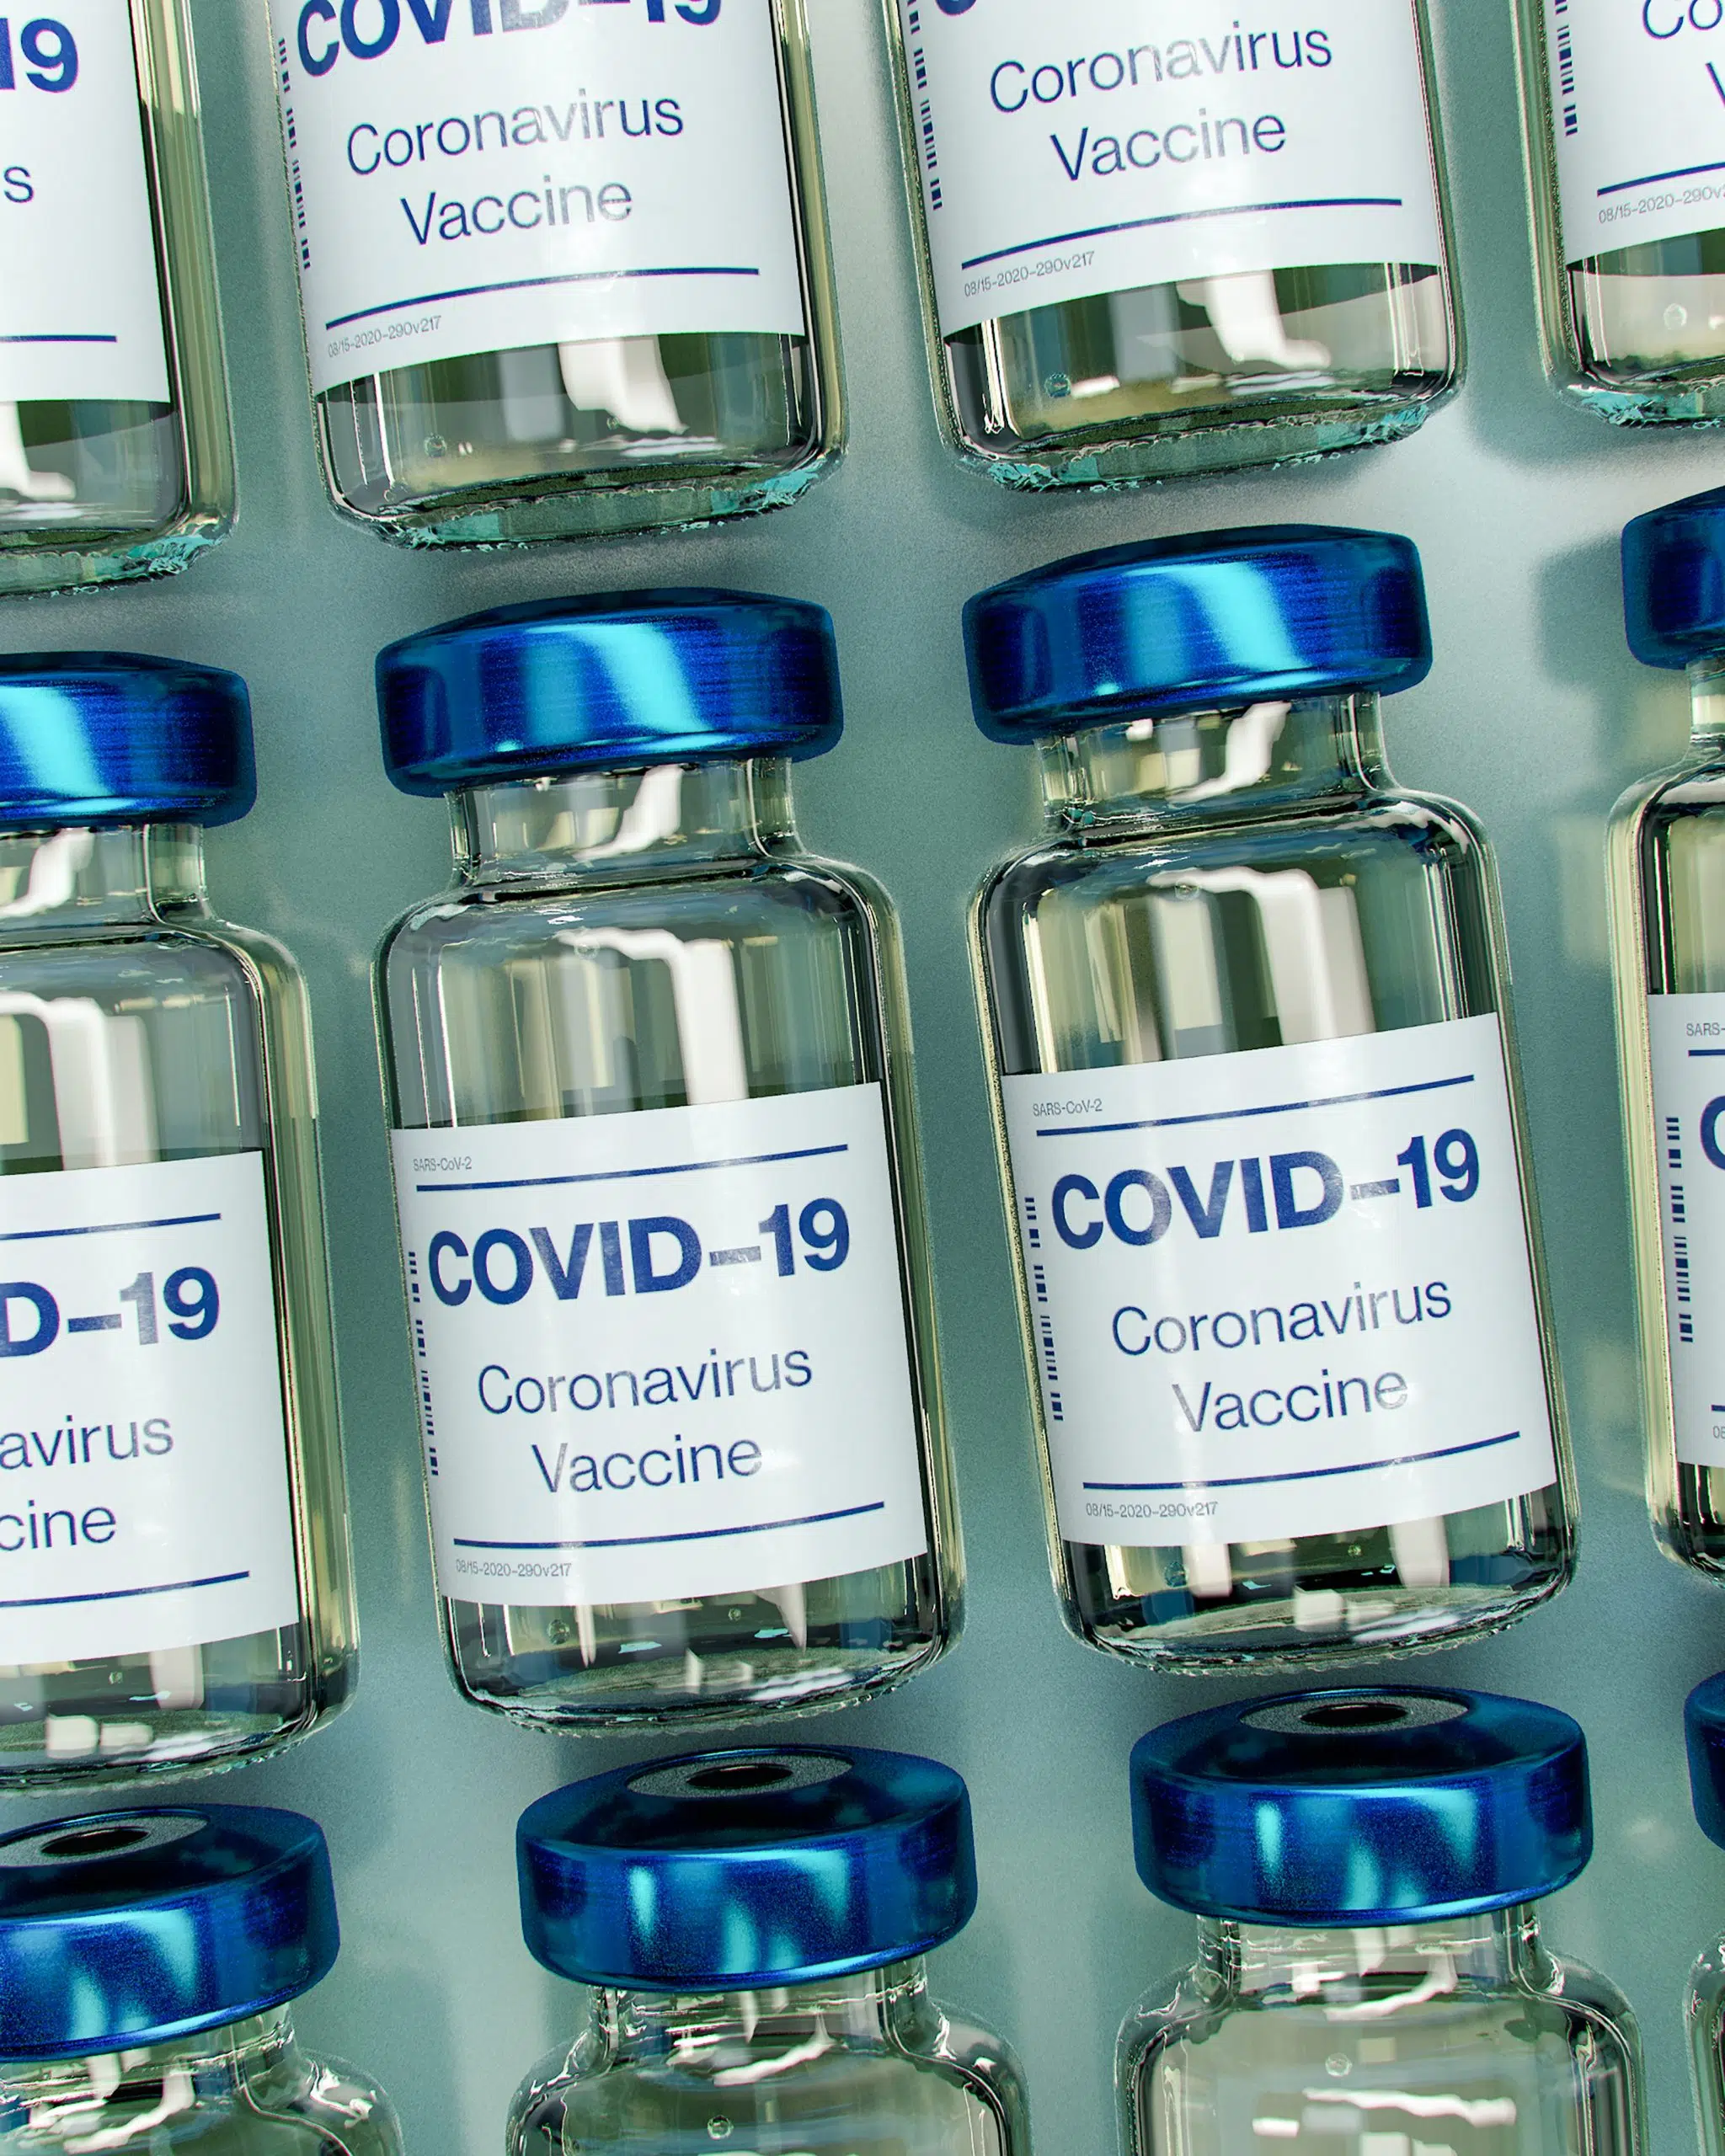 Appointments Open for Second COVID-19 Vaccine Booster for Some People